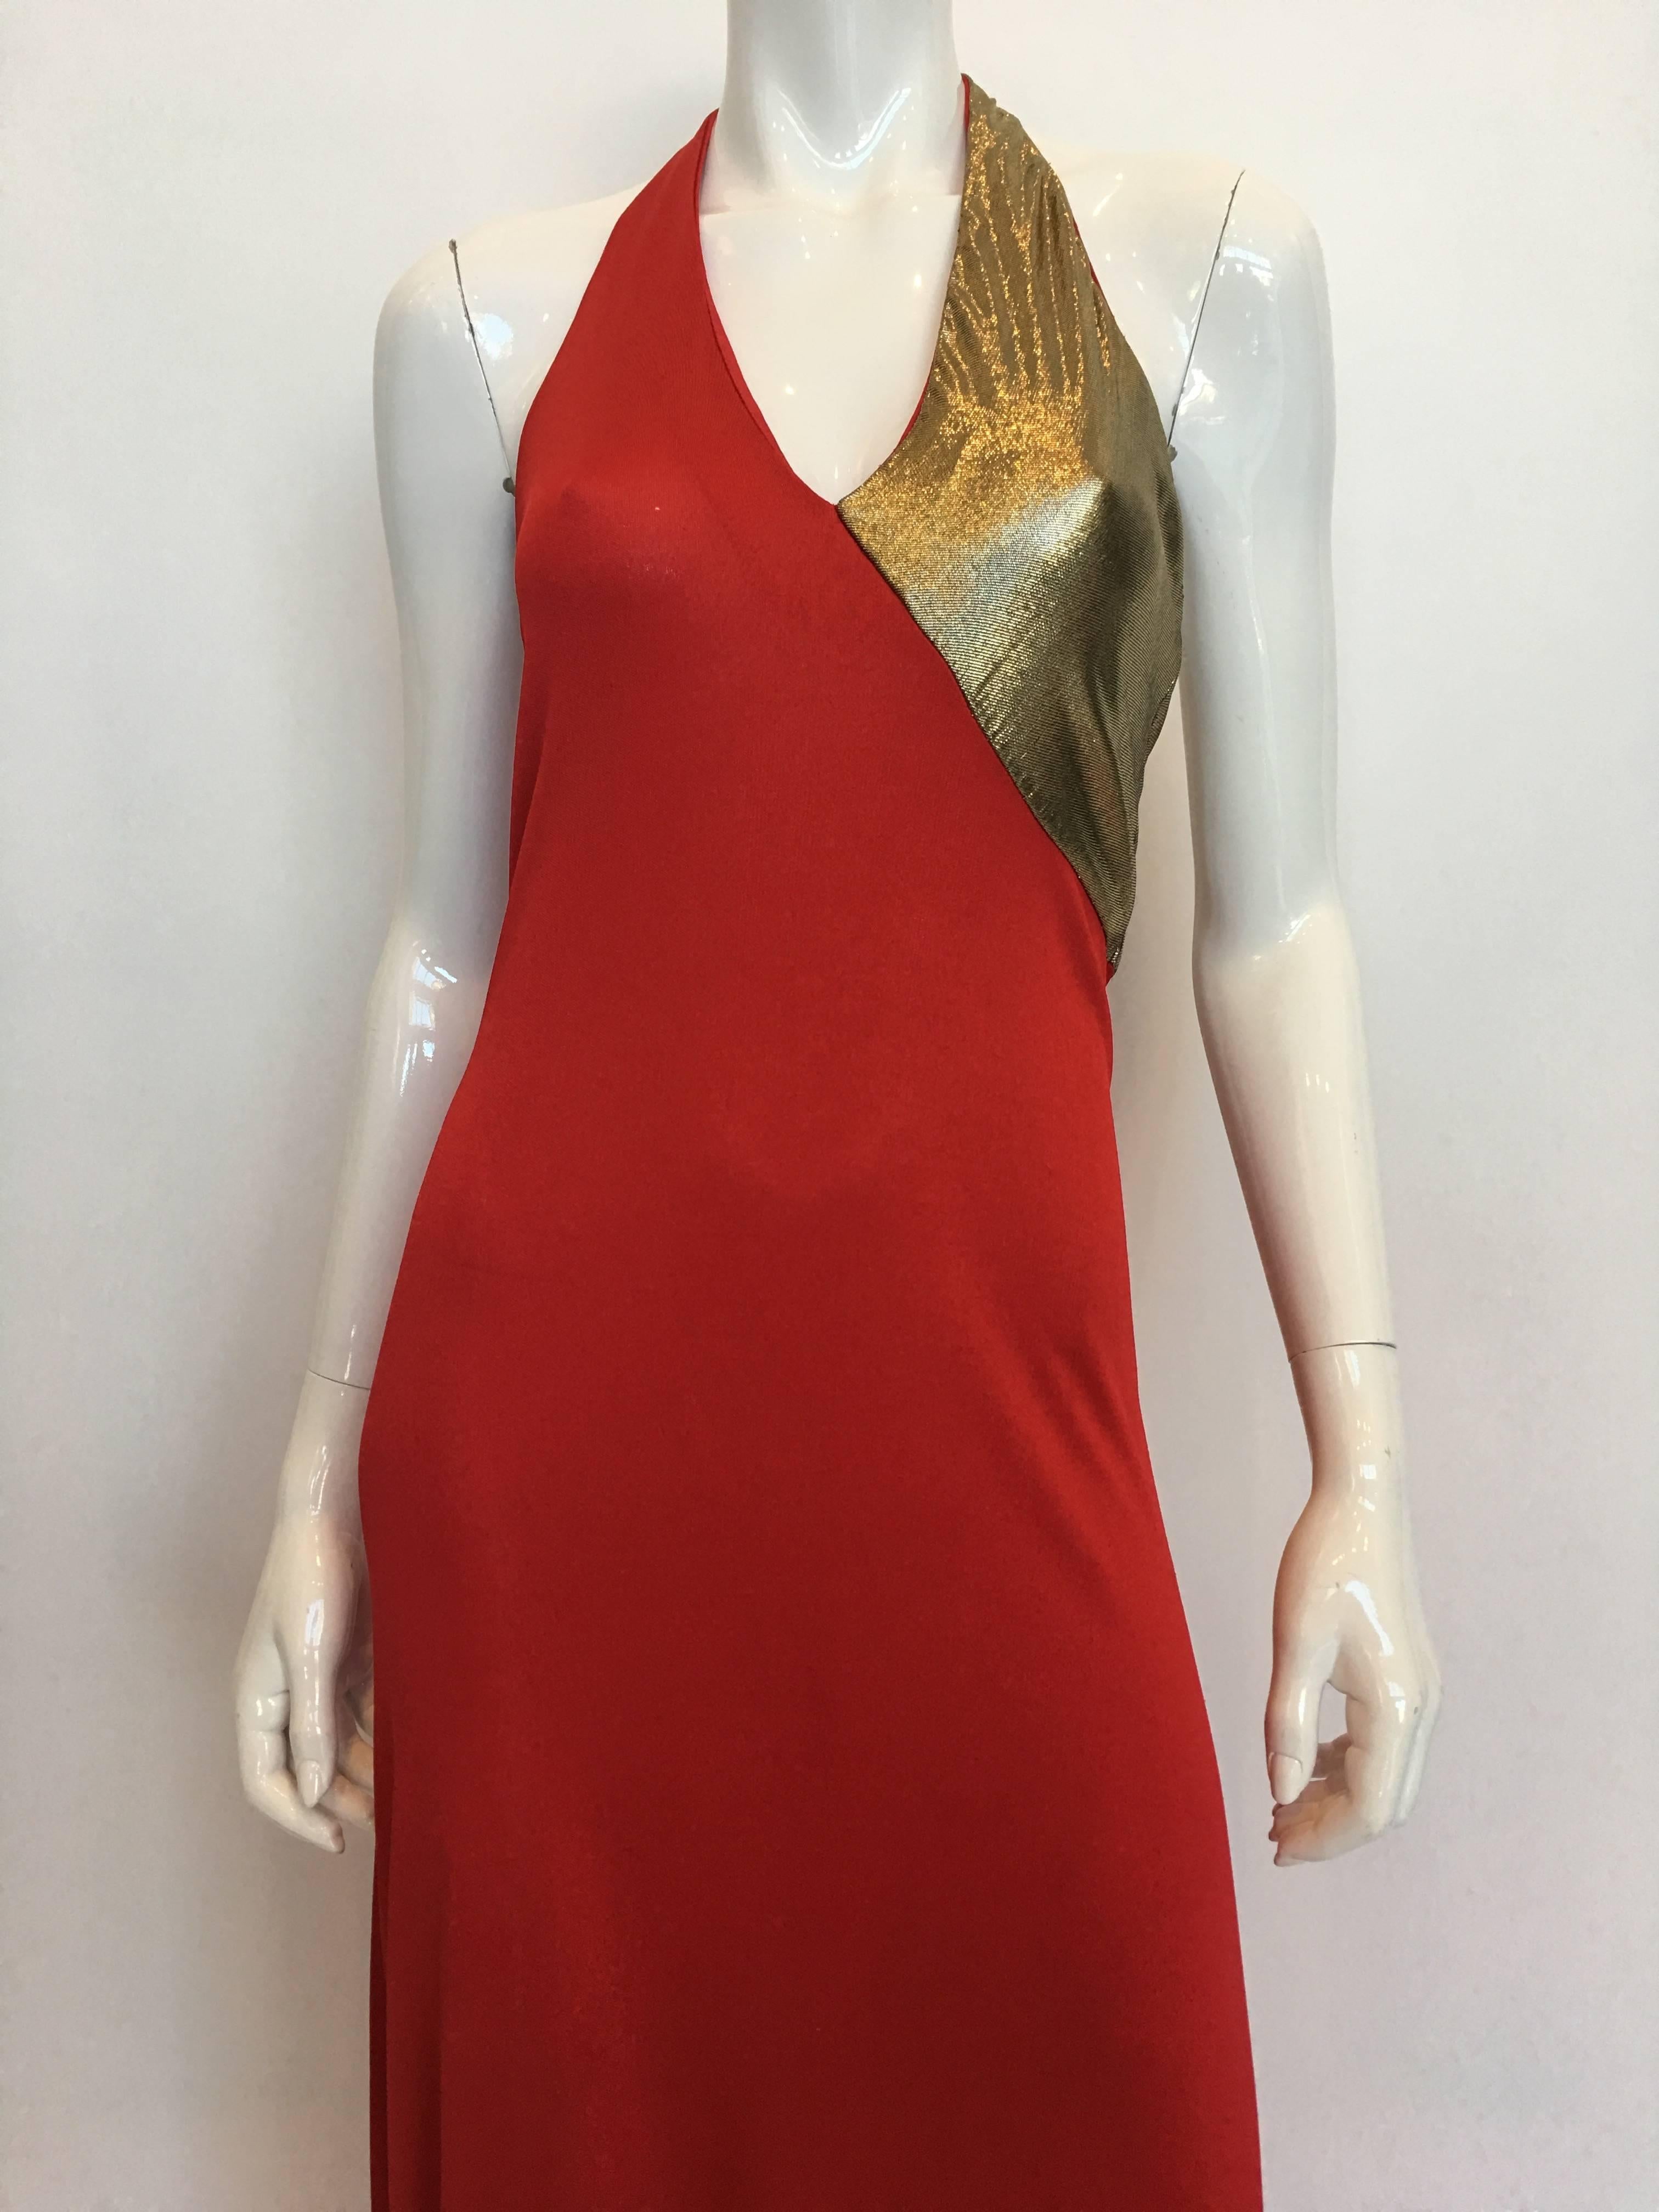 Giorgio Sant'Angelo 1970's Red Jersey Halter Dress with Gold Lame Bust Detail.

*ALL MEASUREMENTS TAKEN FLAT*

Armpit to armpit: 30